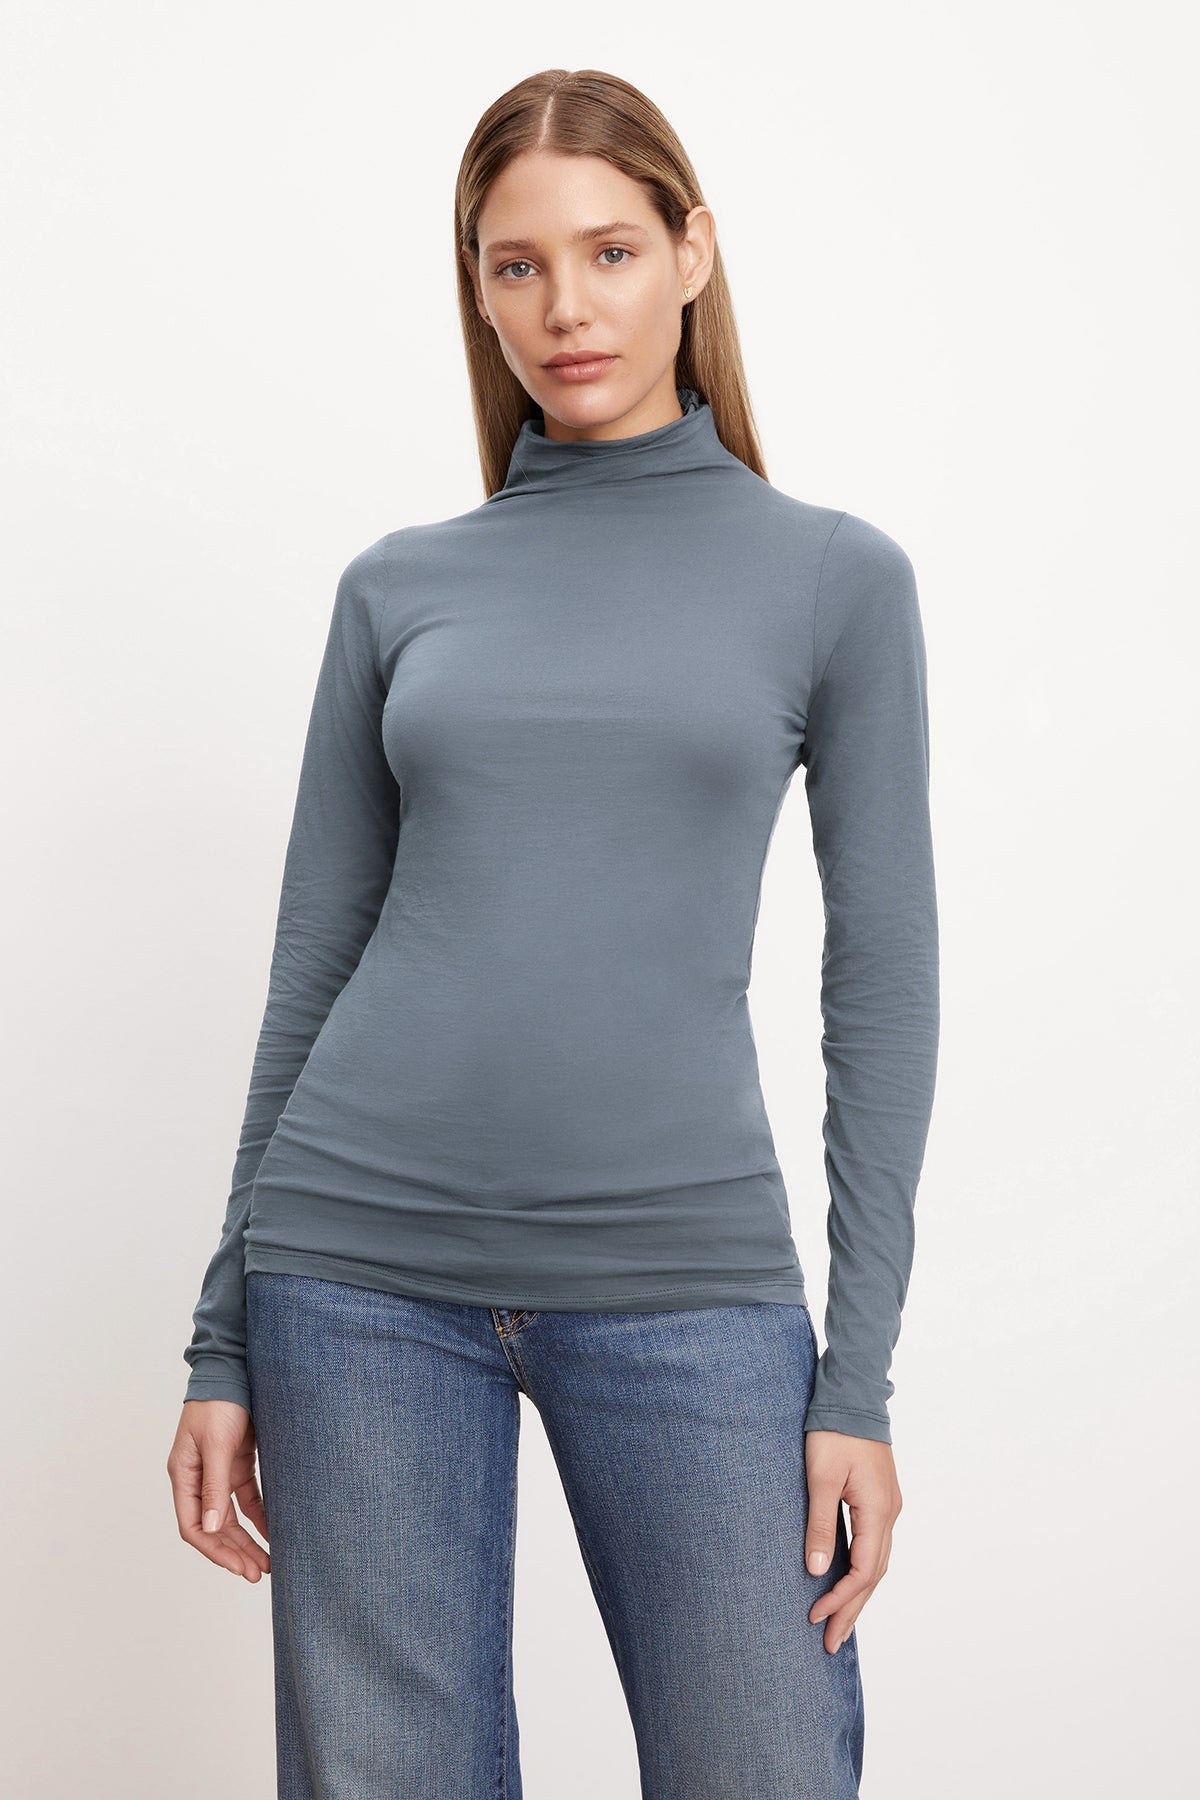 A woman wearing a Velvet by Graham & Spencer TALISIA GAUZY WHISPER FITTED MOCK NECK TEE and jeans.-36001491484865